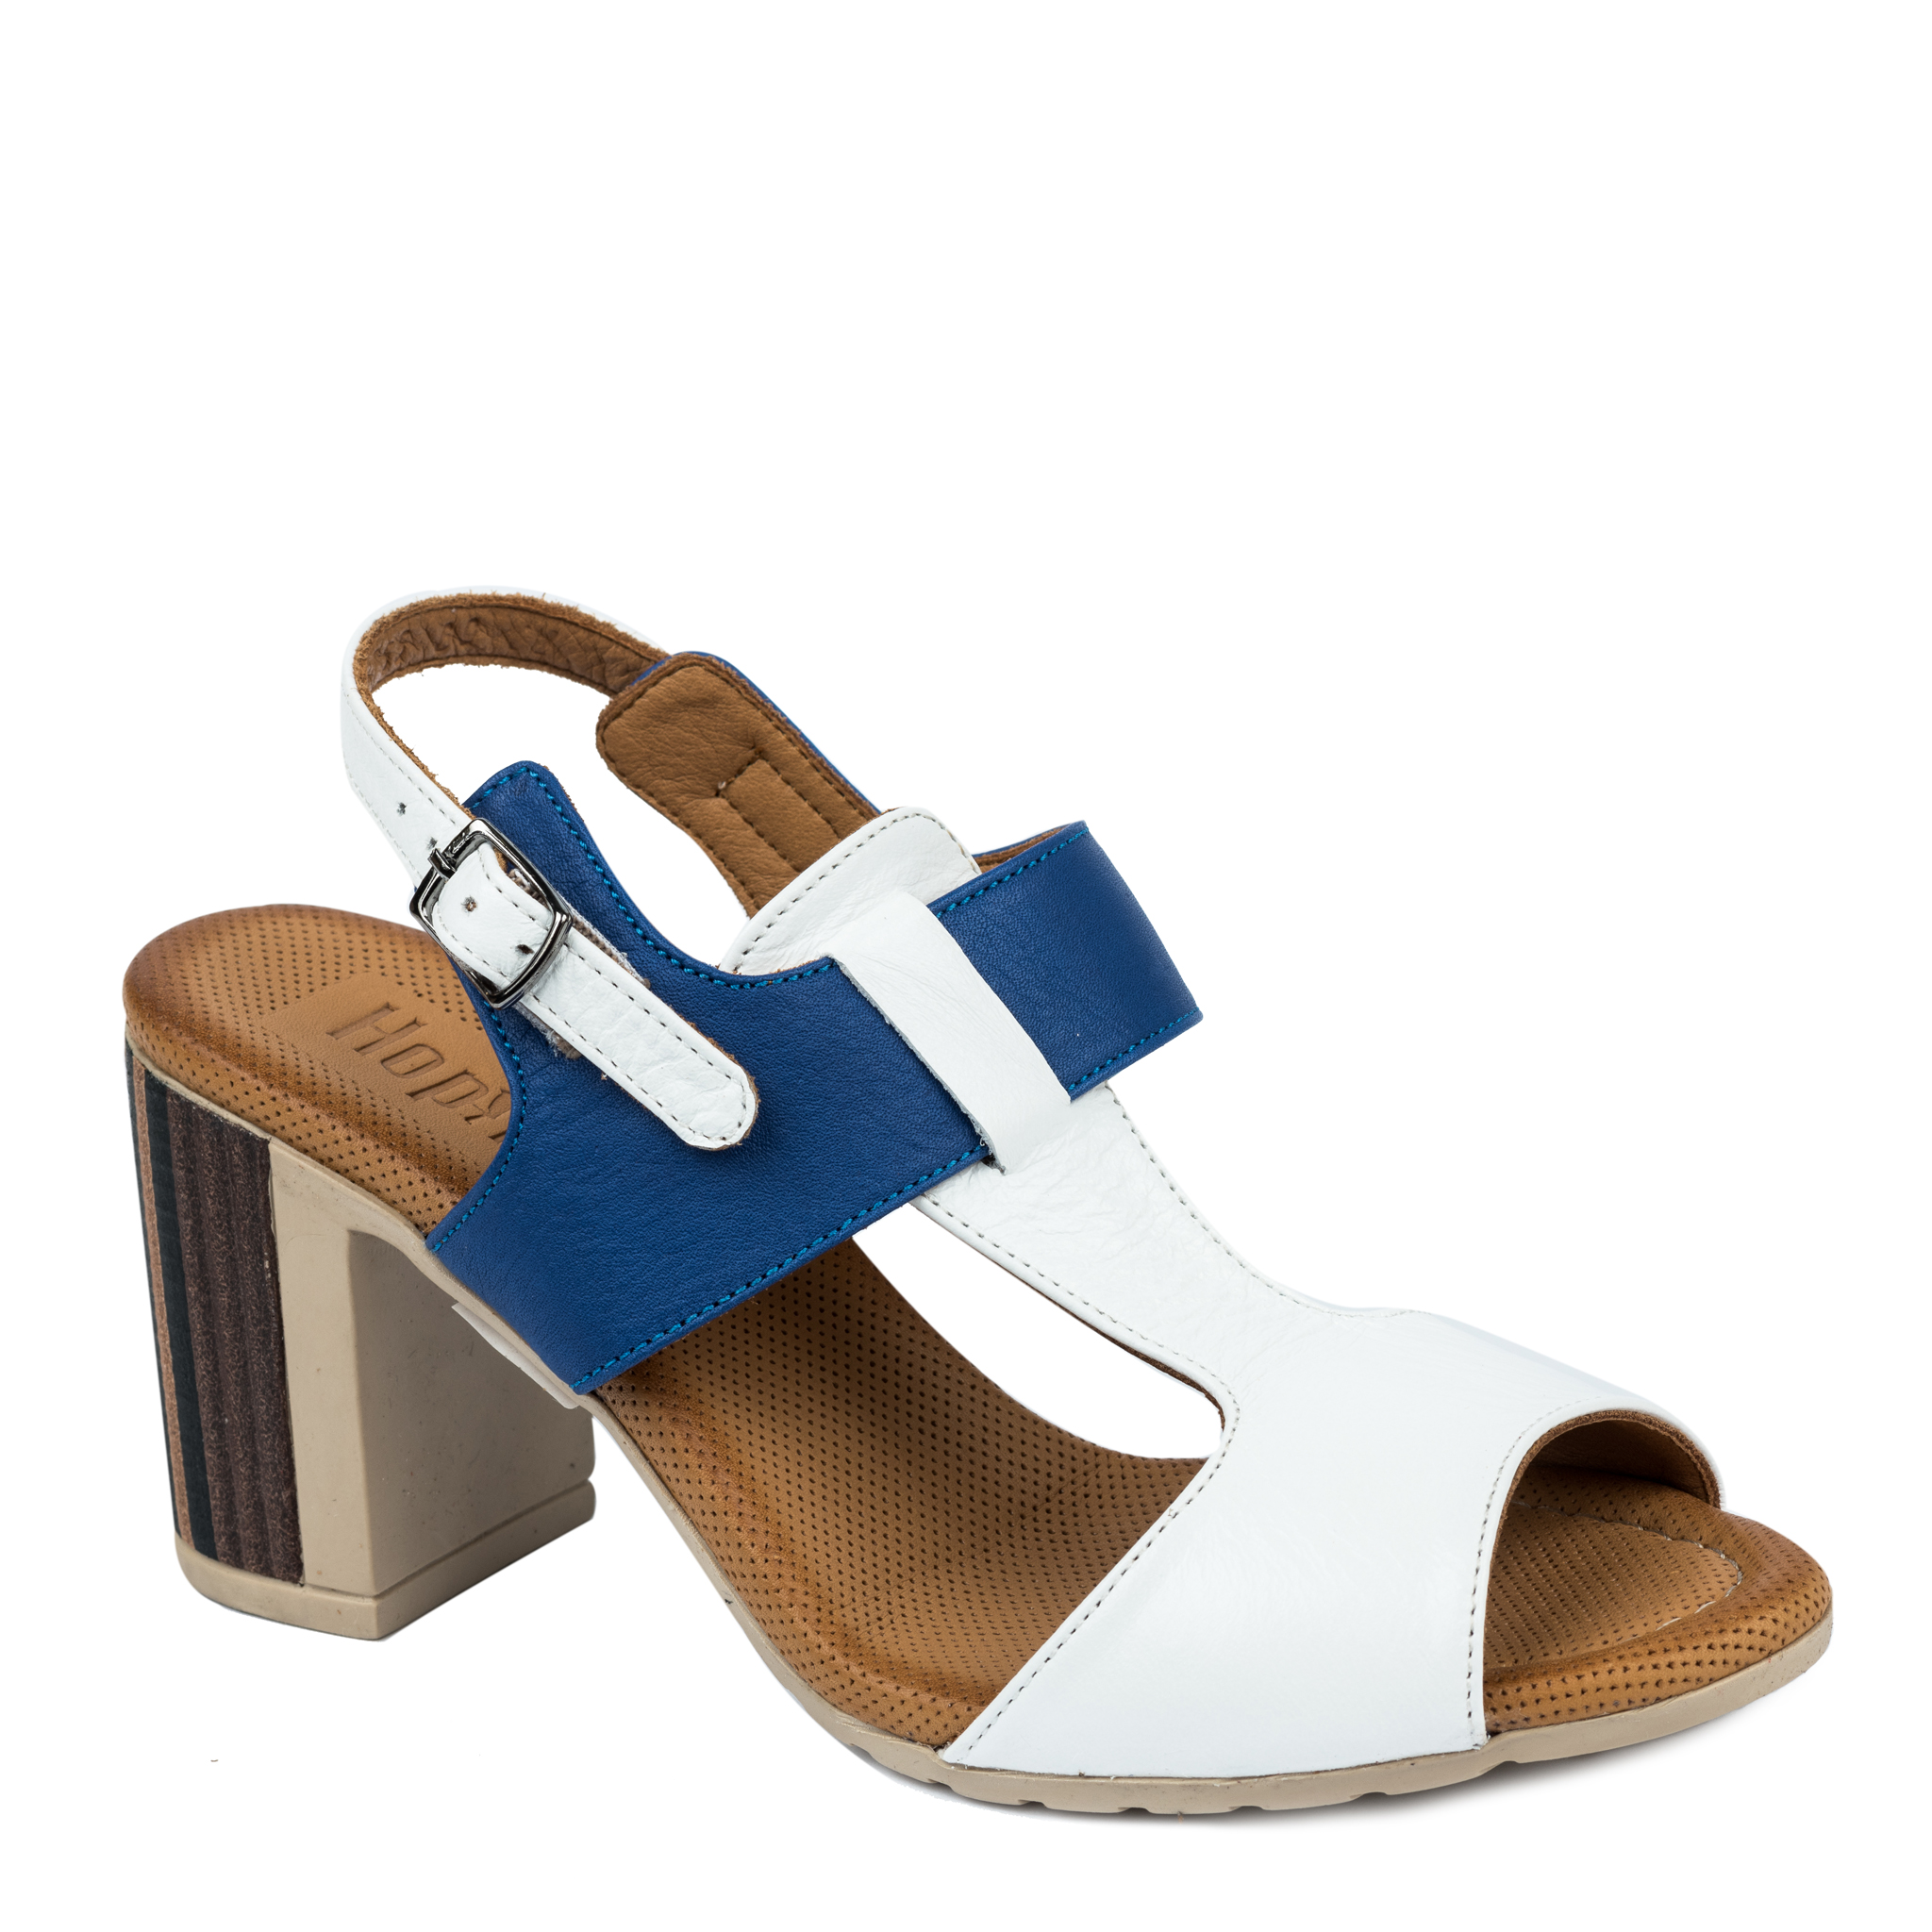 Leather sandals A785 - WHITE